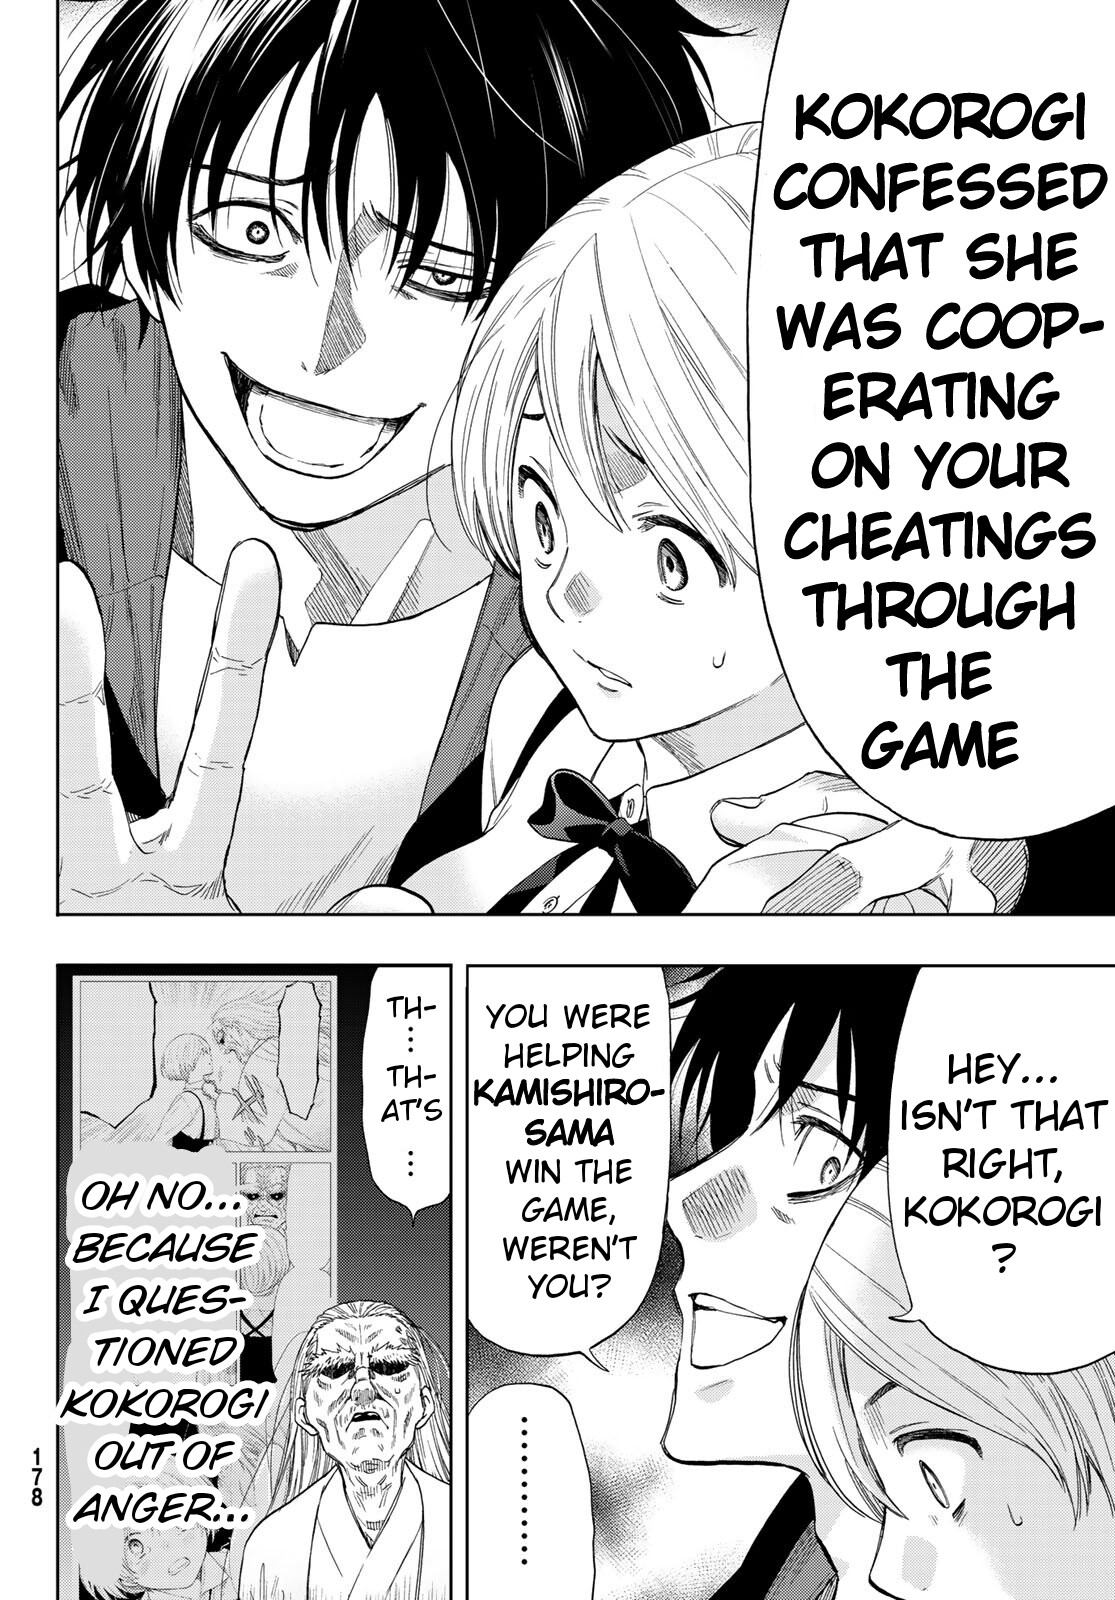 Tomodachi Game Ch. 59 "Sell Yourself"